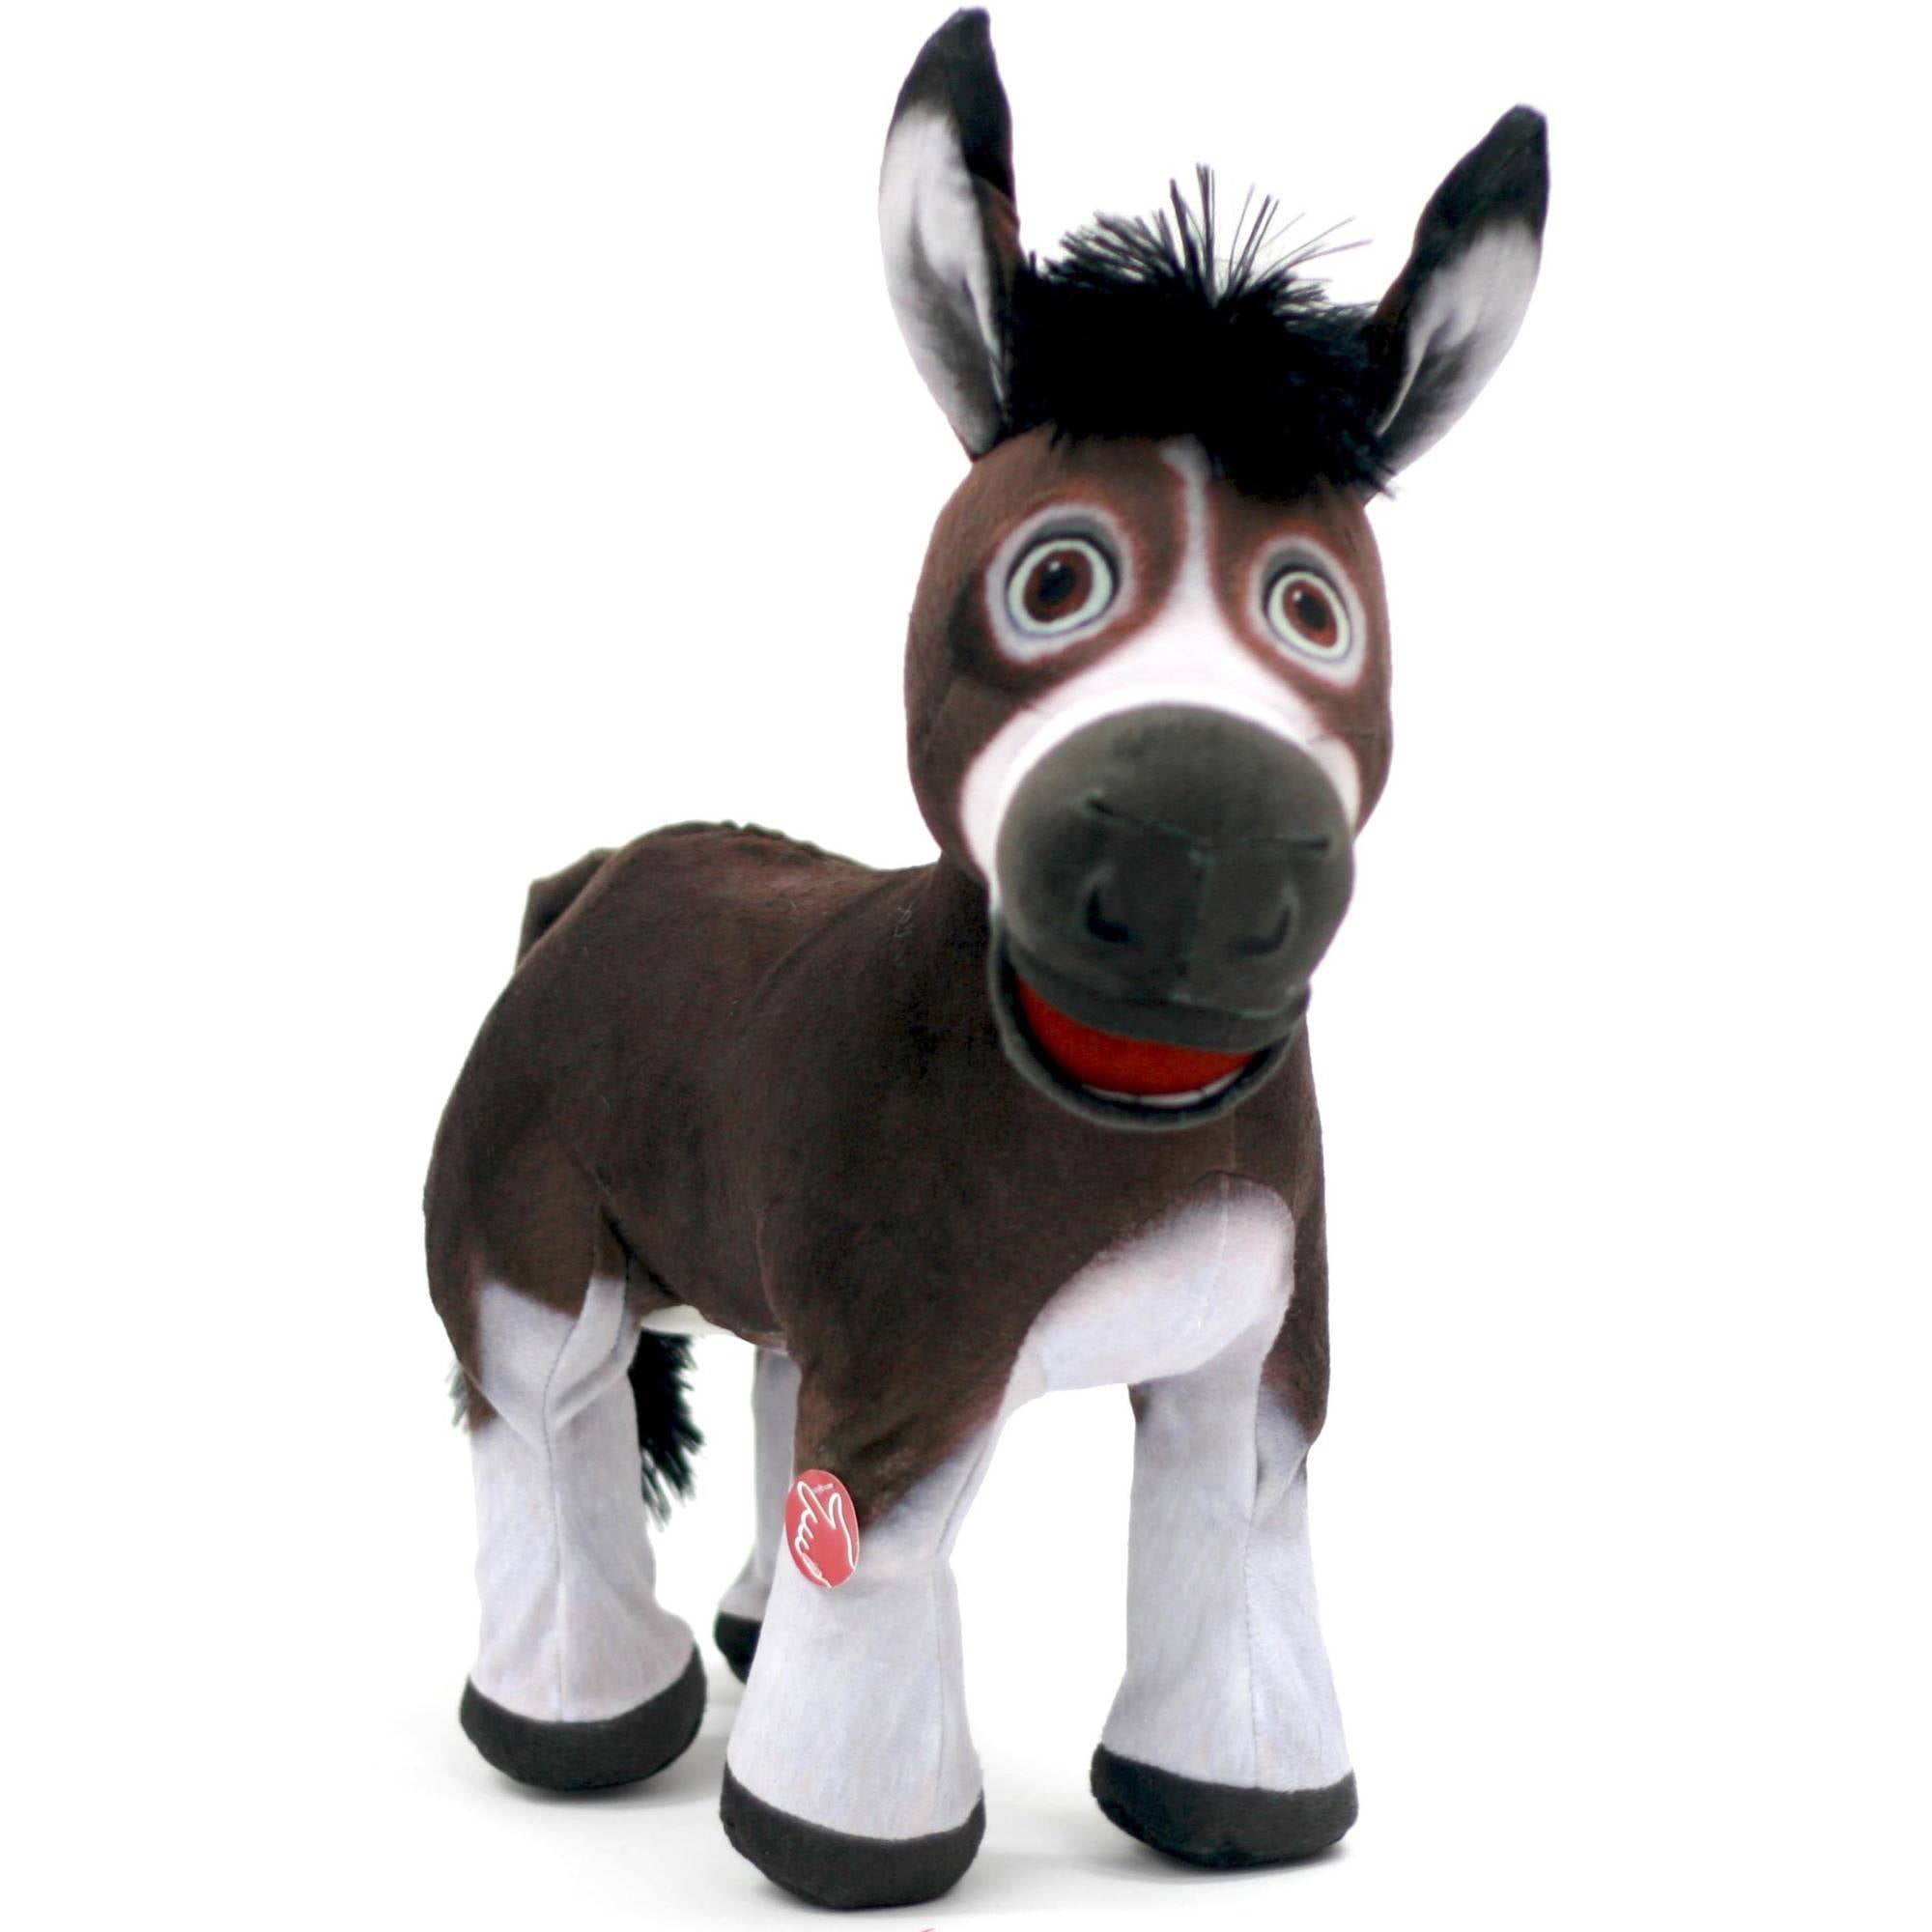 The Star Bo The Donkey Sony Pictures Movie Children Slippers Size Sm/Med  11-1 